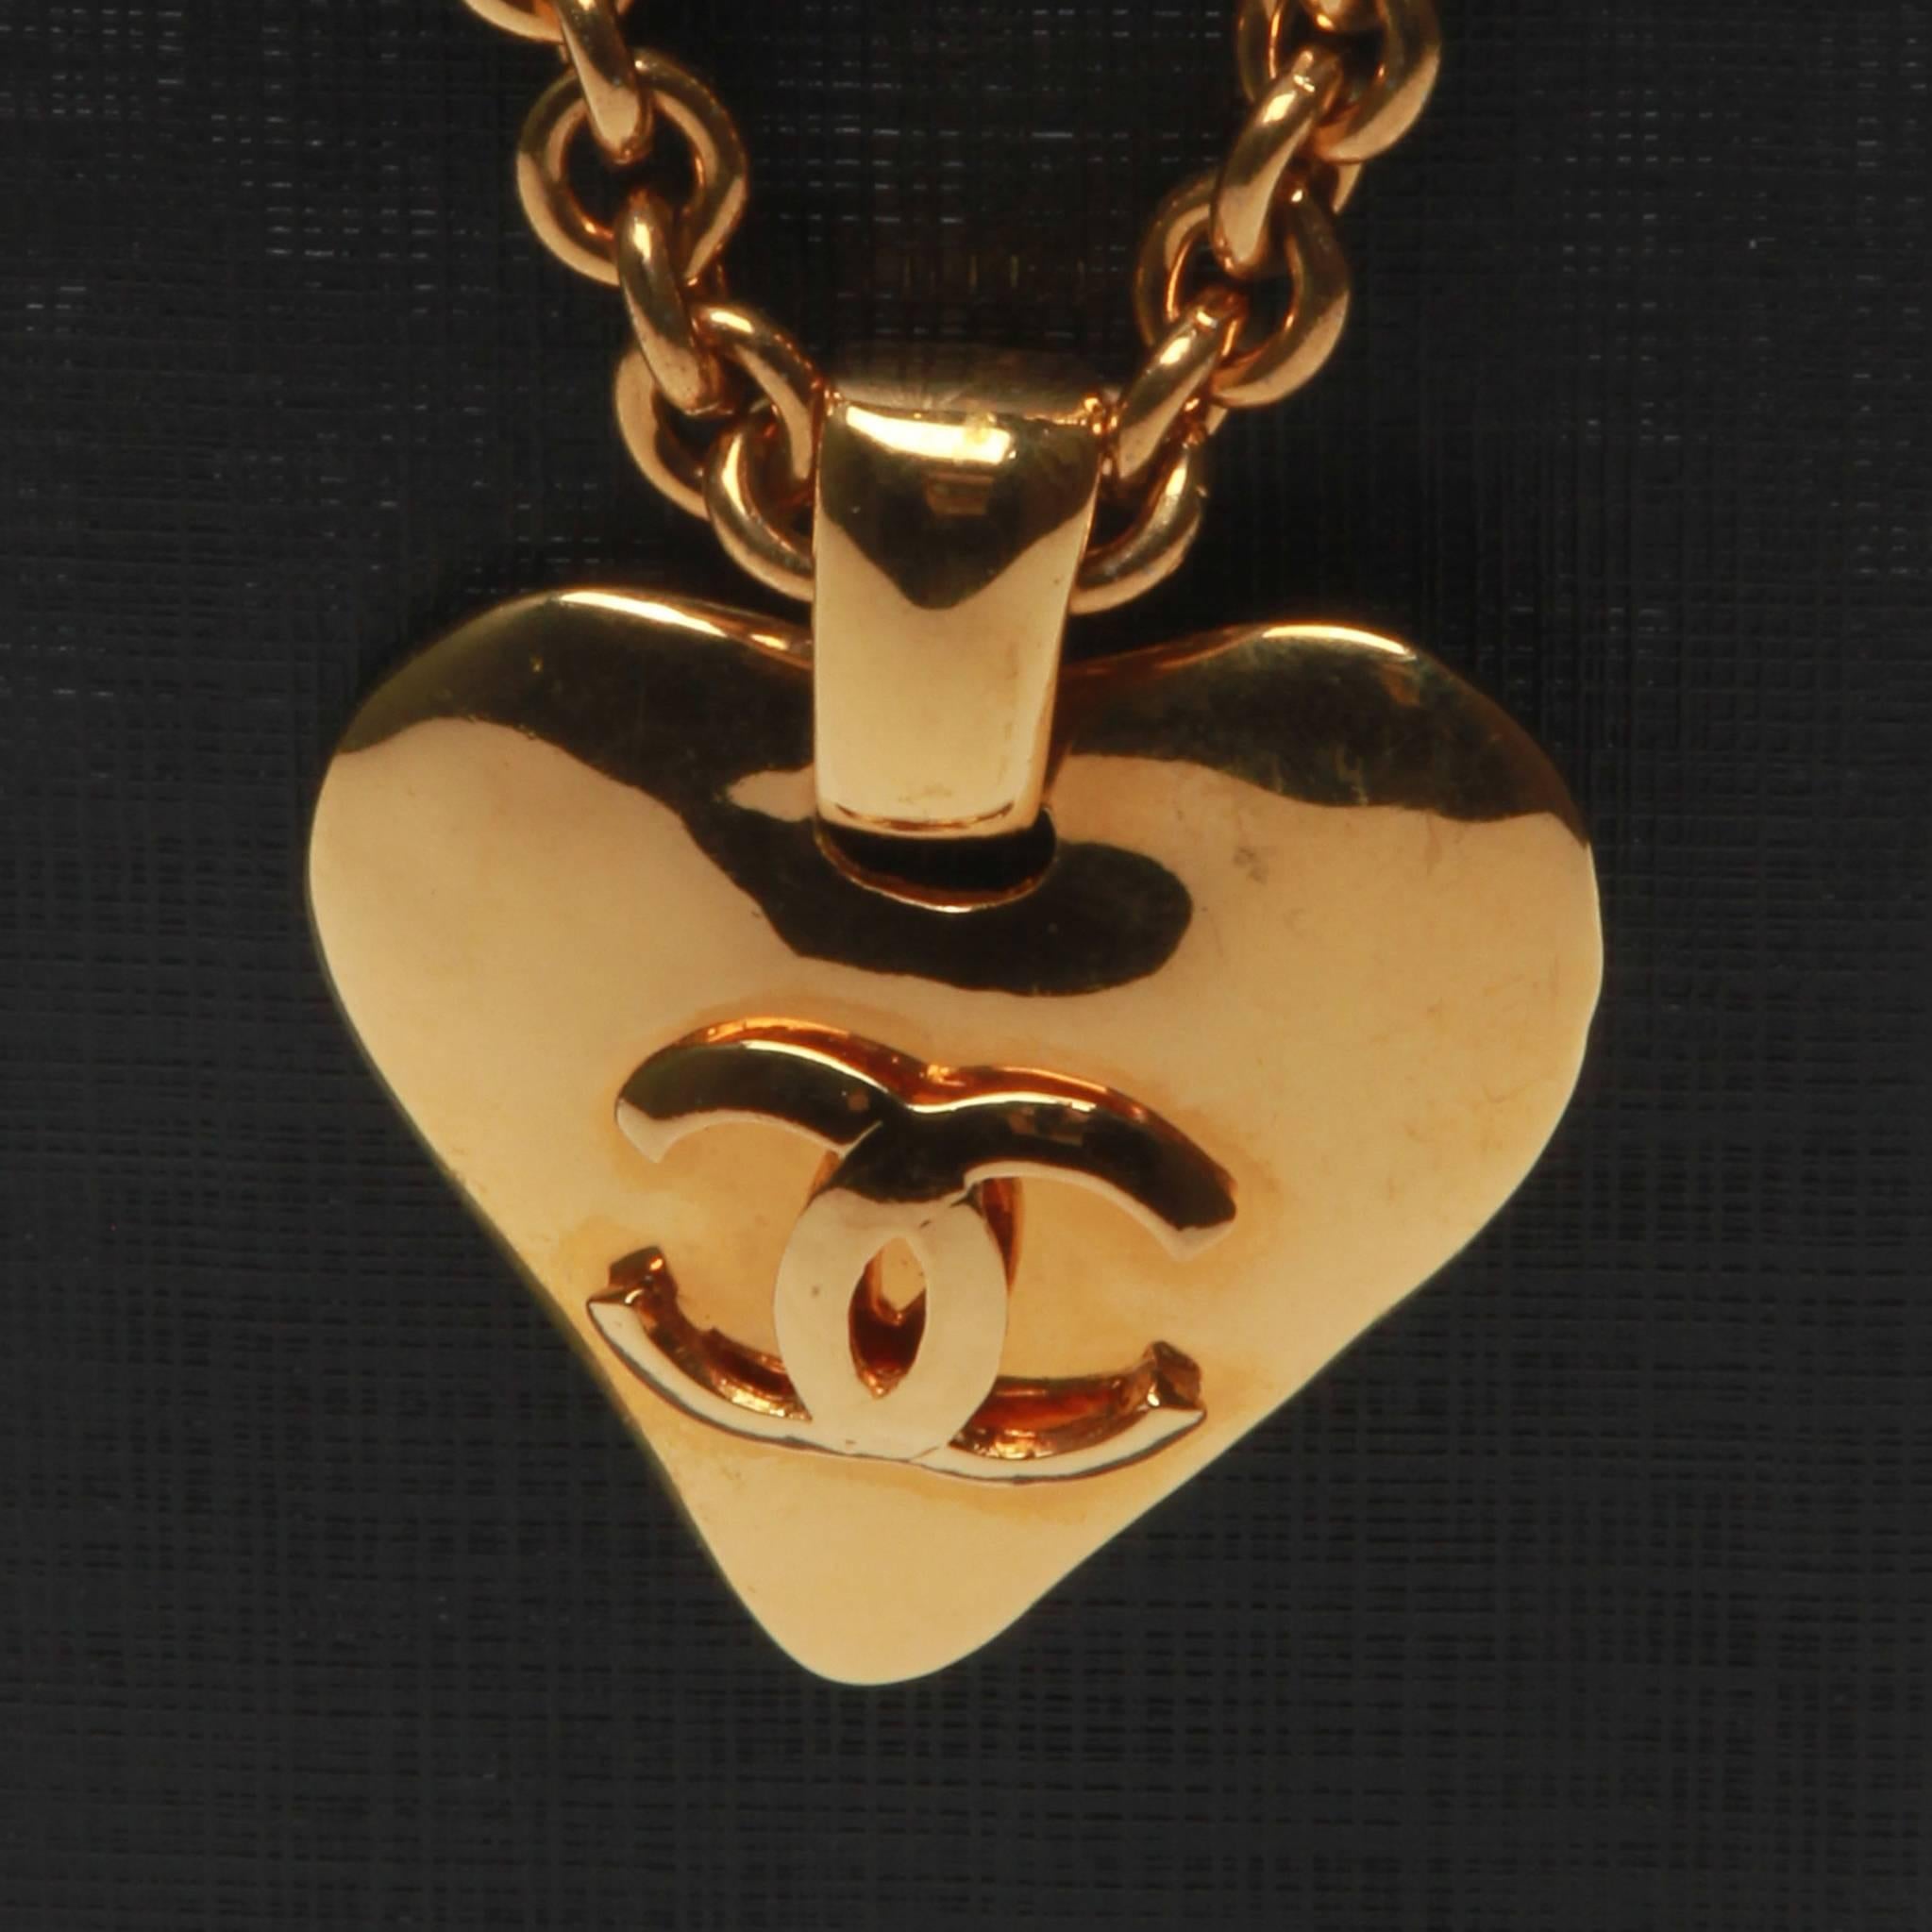 Chanel love heart interlocking CC pendant necklace in gold-tone metal with rolo chain and spring ring fastening.

Stamped 93 P 